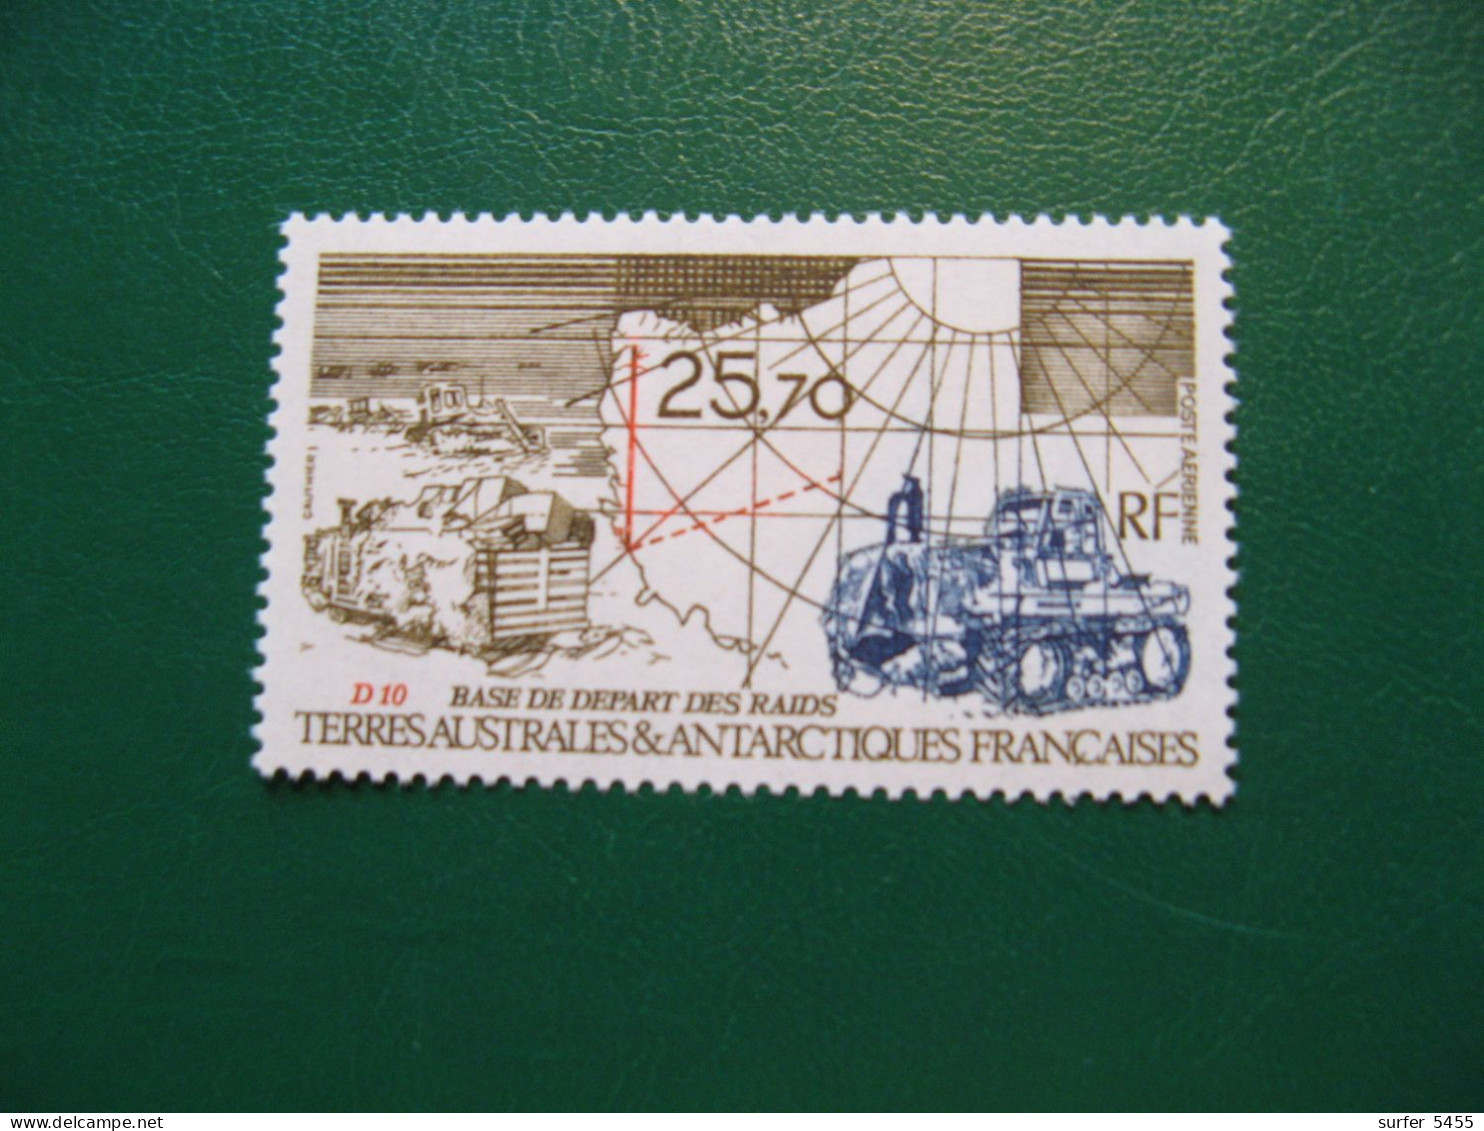 TAAF YVERT POSTE AERIENNE N° 127 - TIMBRE NEUF** LUXE - MNH - SERIE COMPLETE - FACIALE 3,91 EUROS - Ungebraucht